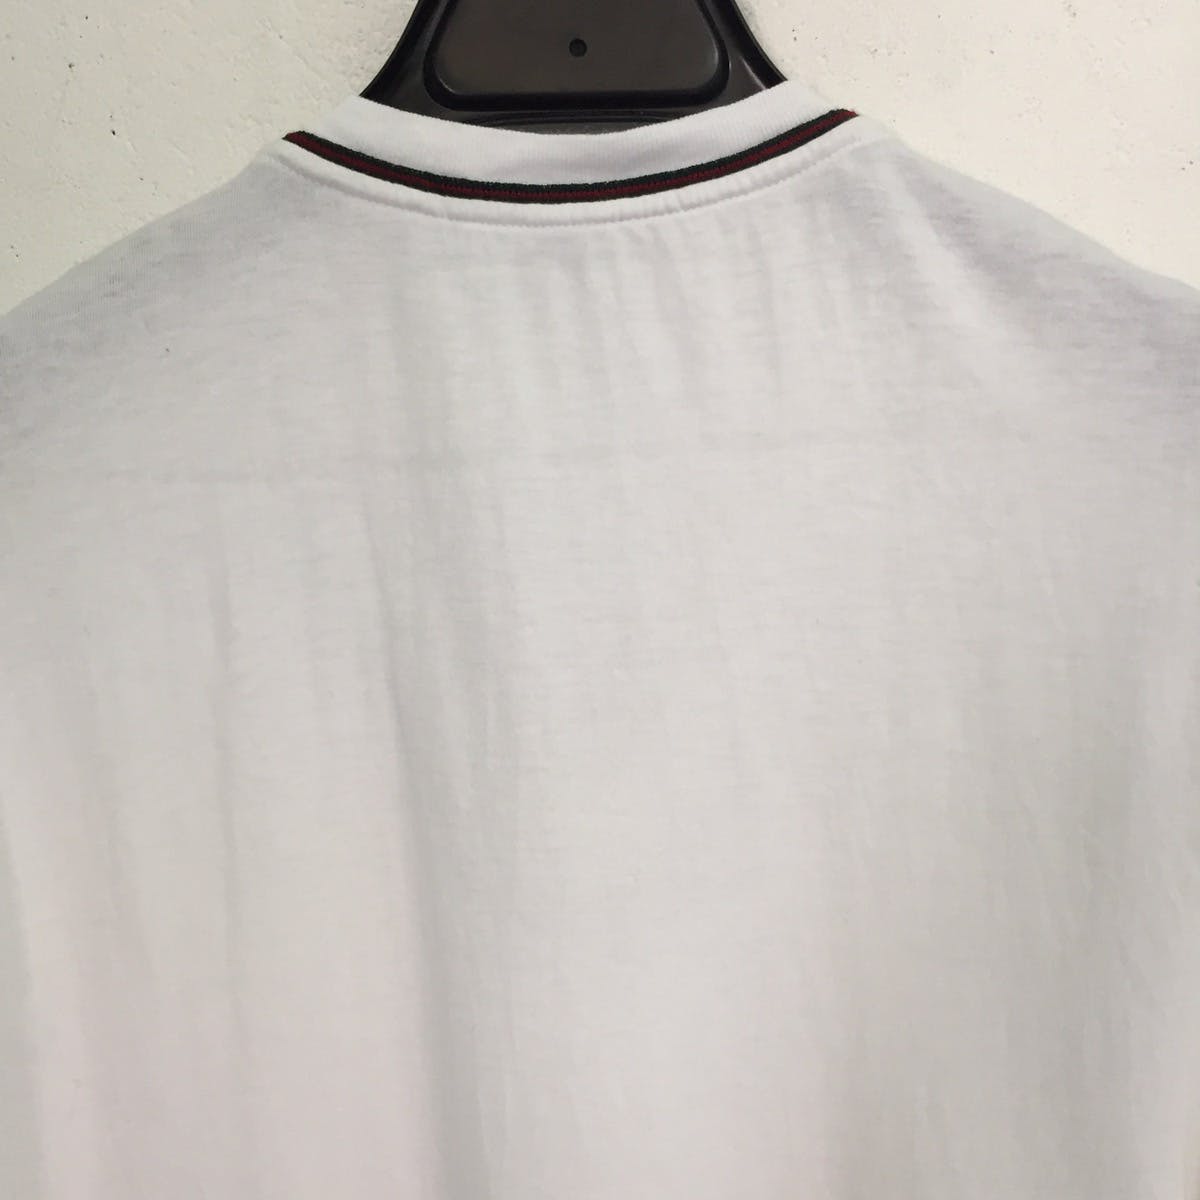 Gucci White Tee V Neck MADE IN ITALY - 12